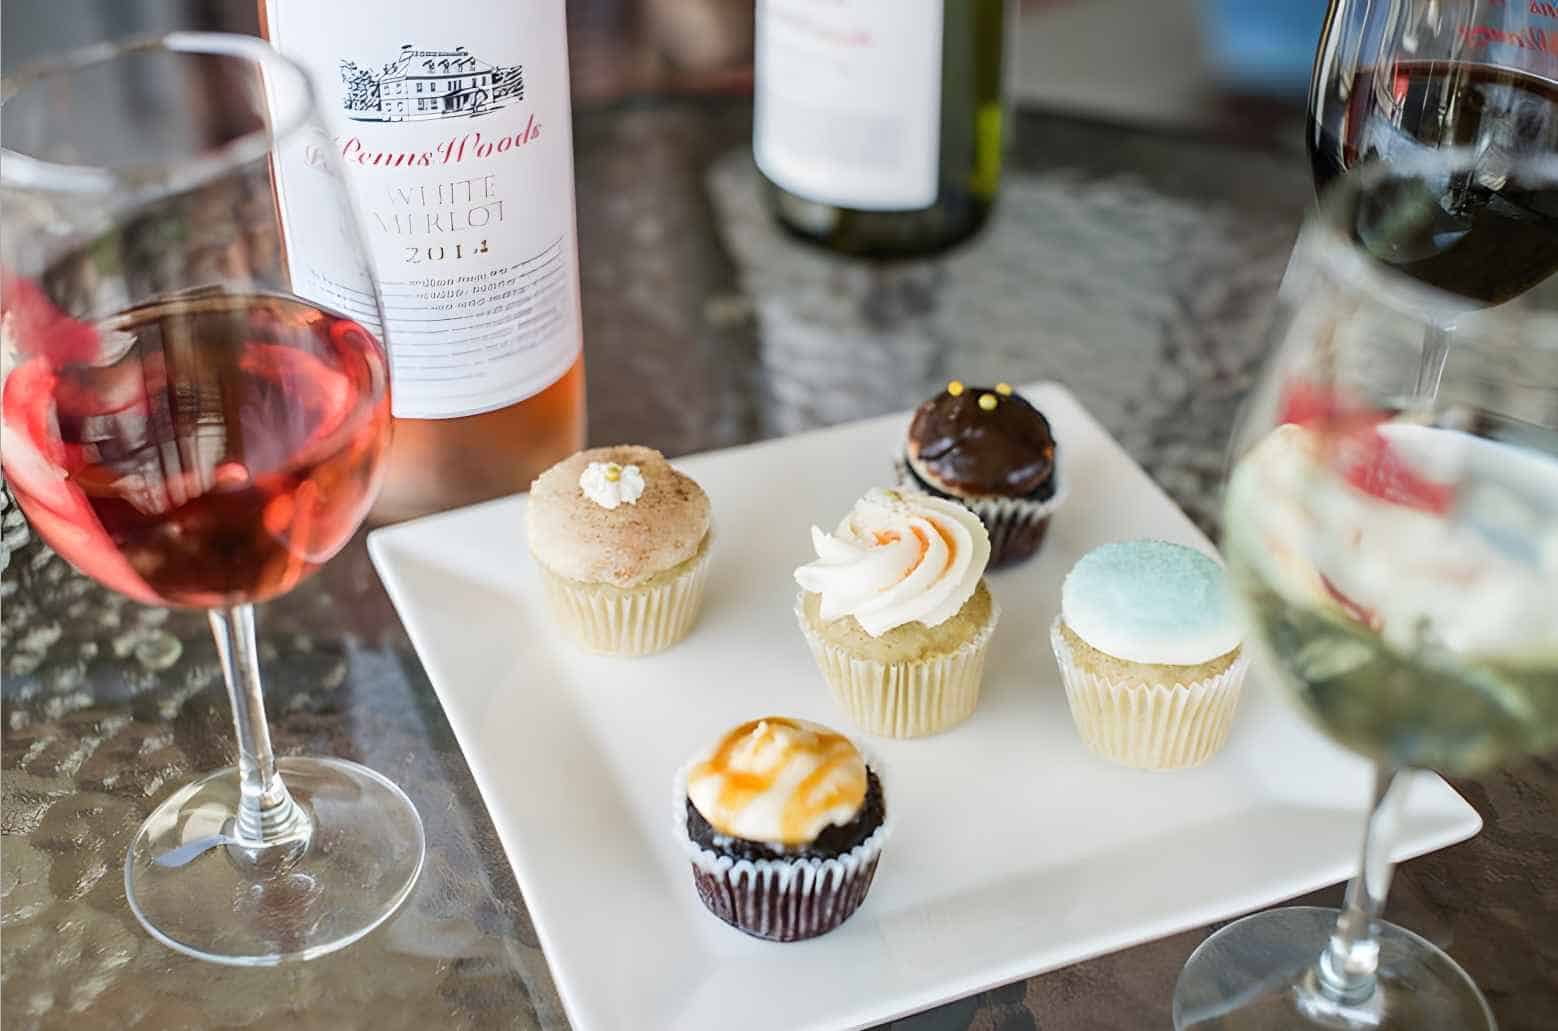 Cupcakes with wine